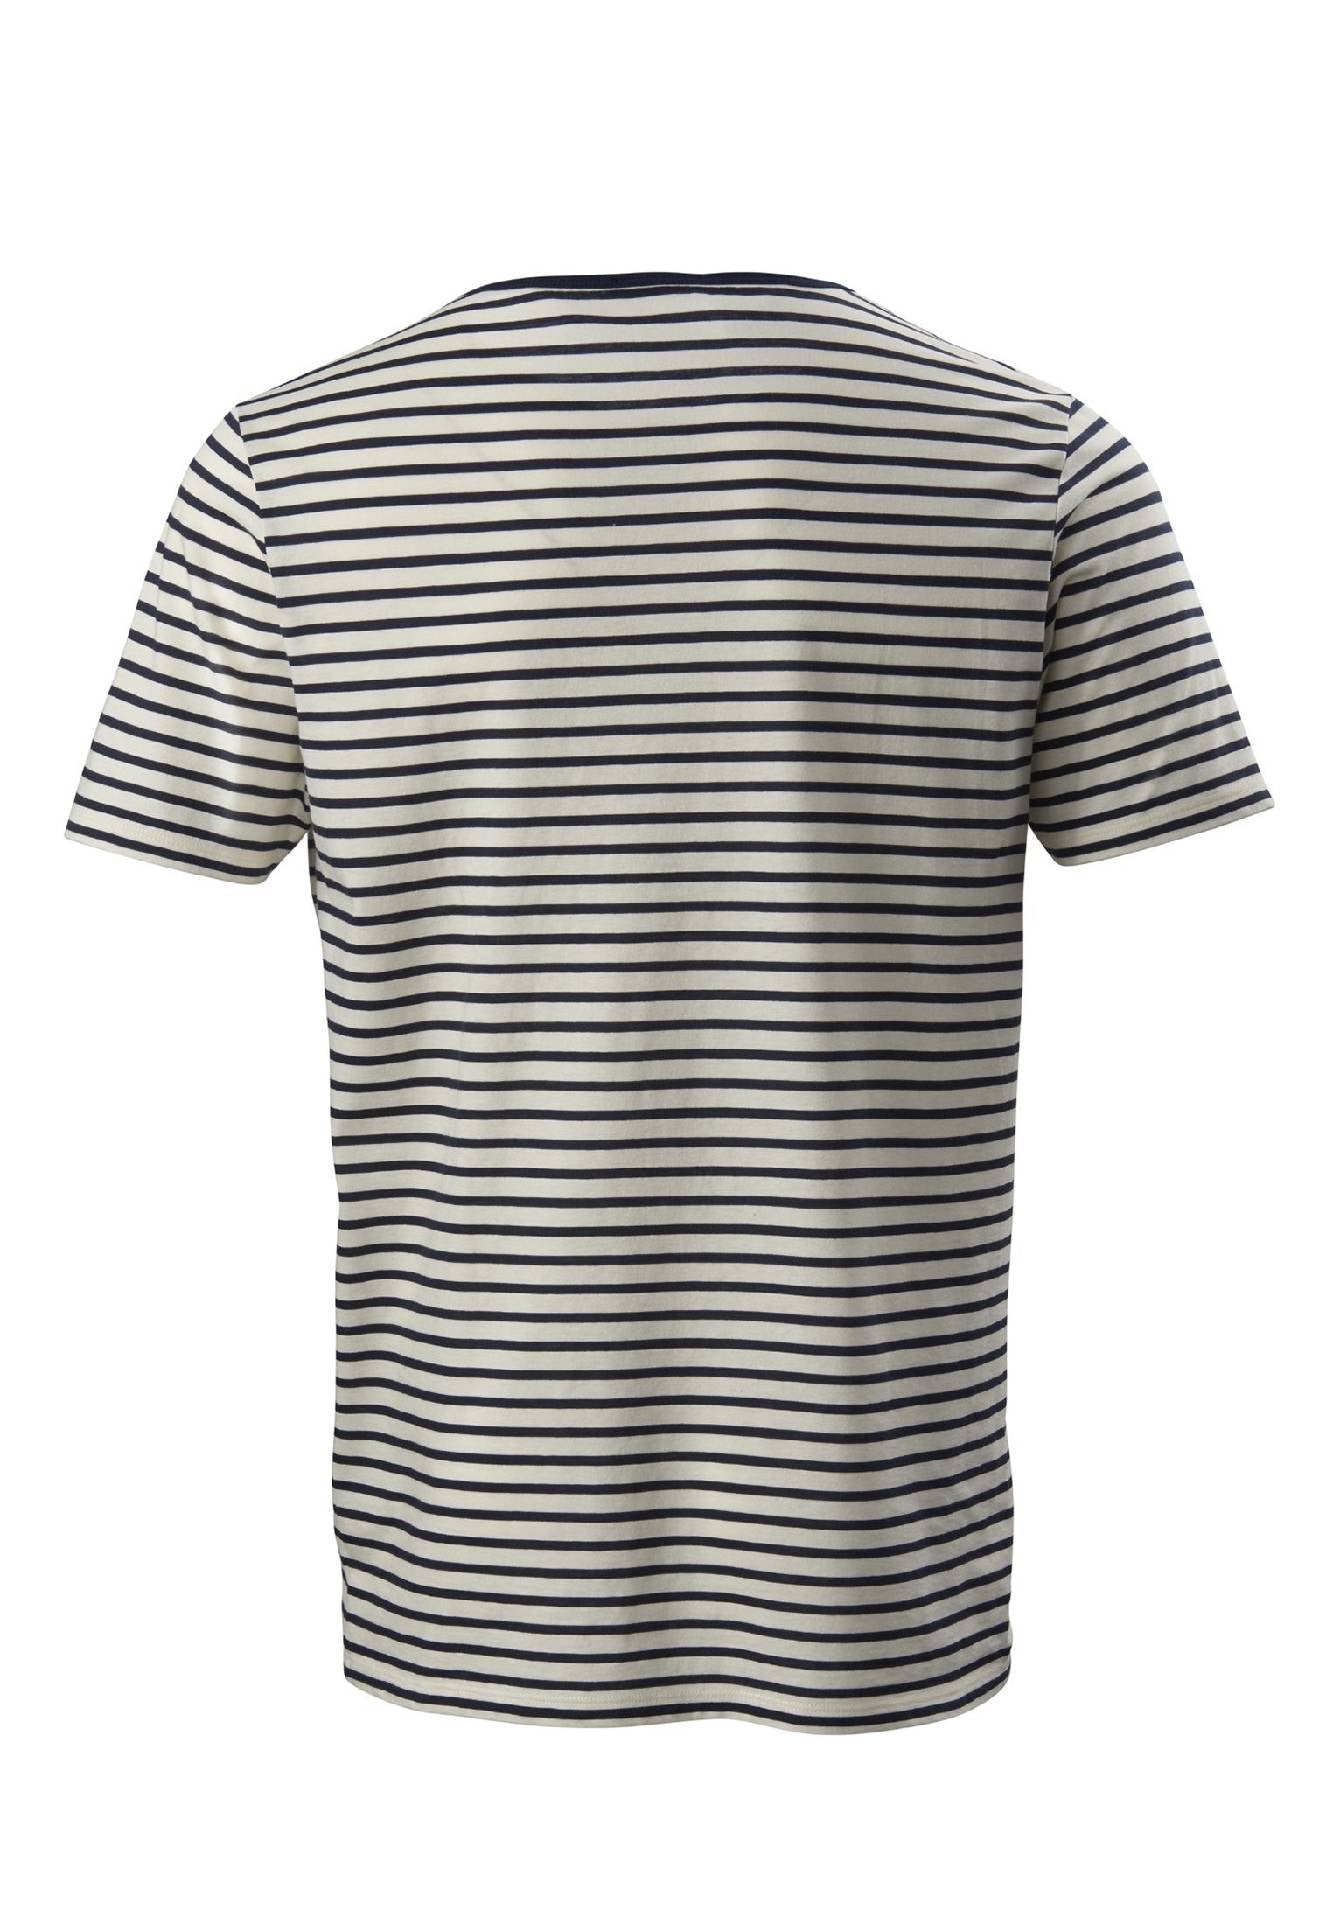 The Striped T-Shirt